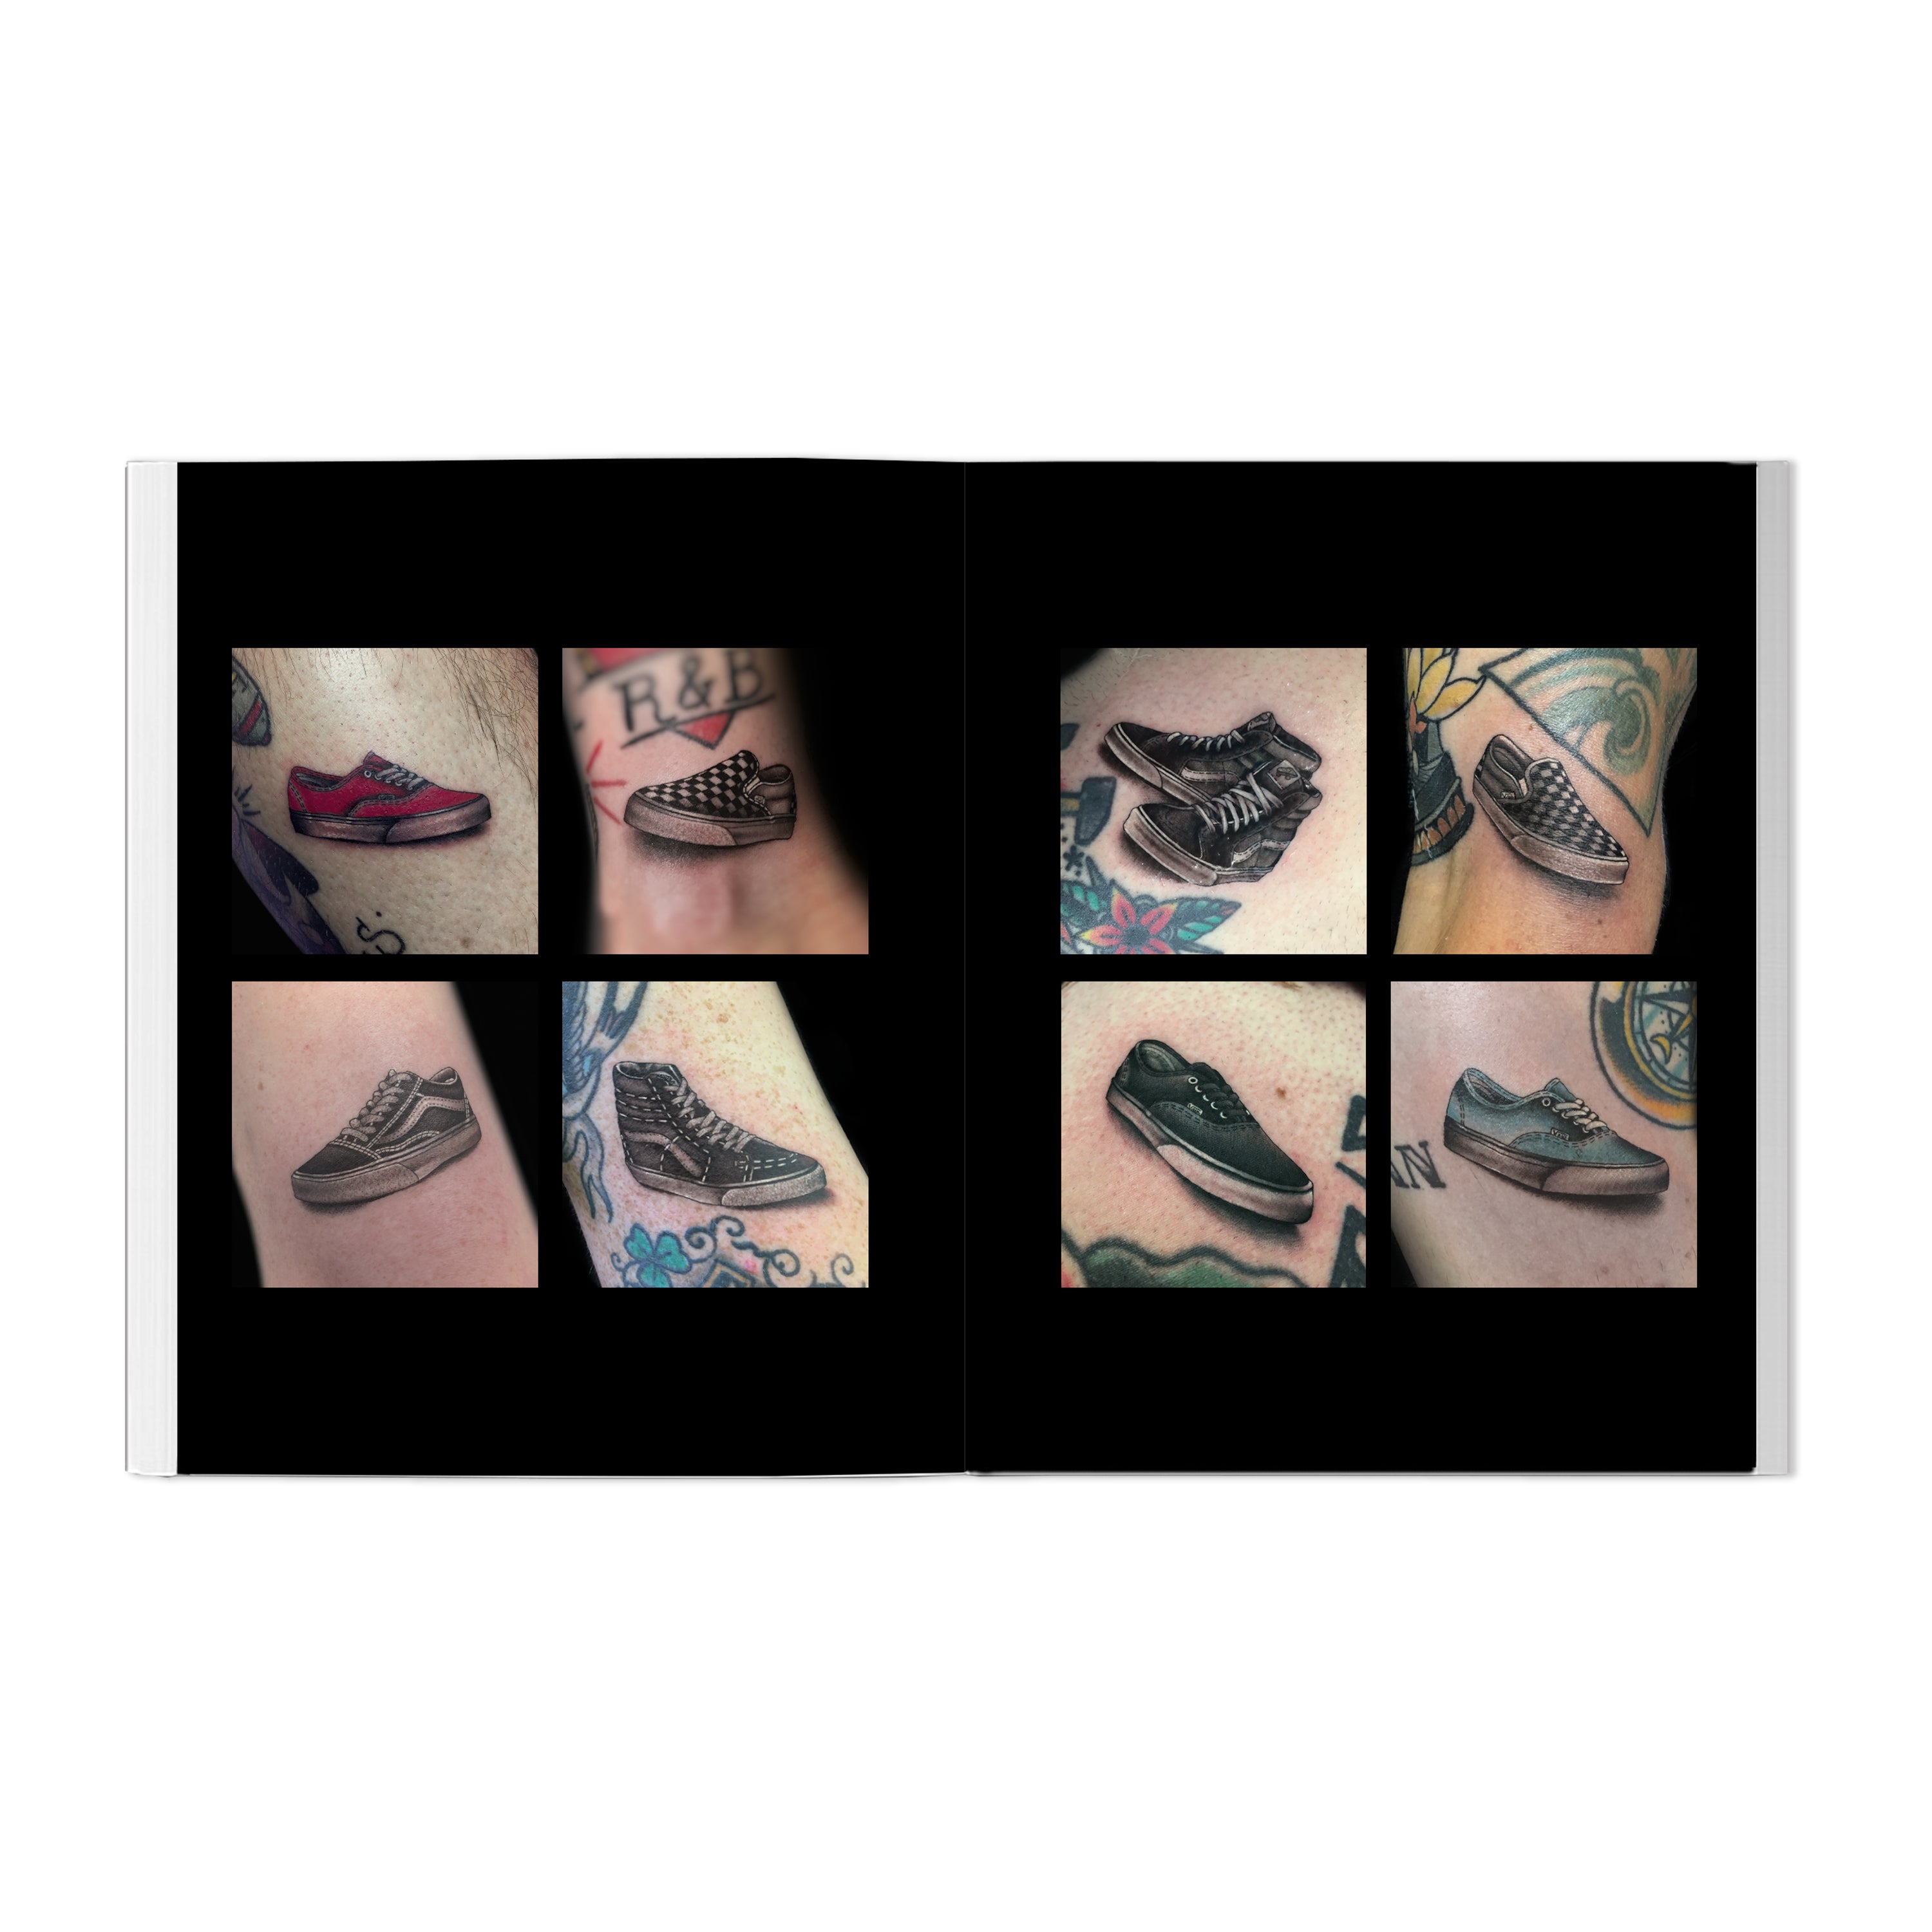 Details more than 68 belgian loafer tattoo best  incdgdbentre